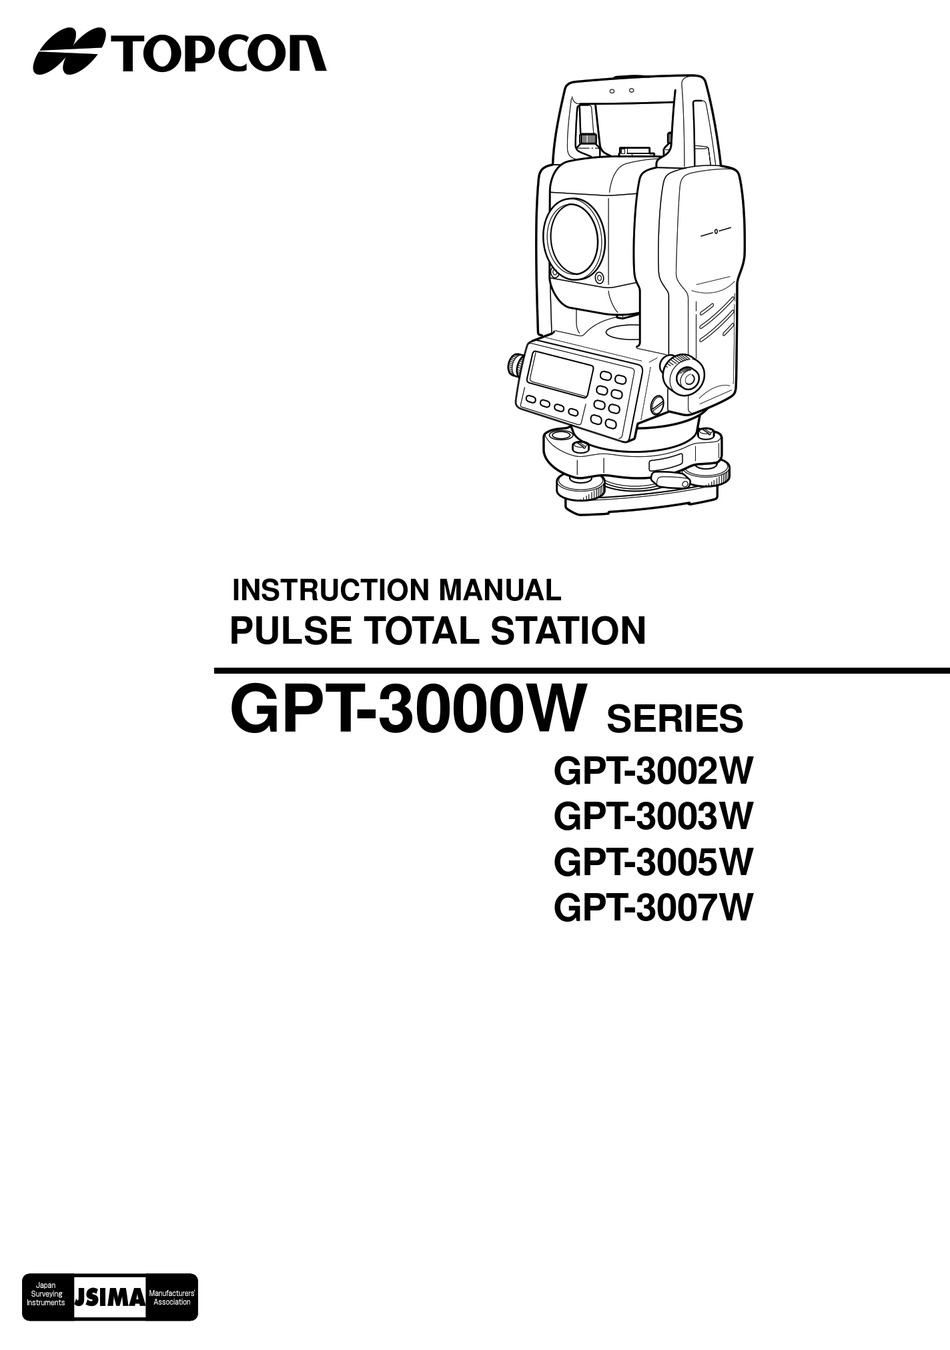 GTS-200 SERIES TOPCON INSTRUCTION MANUAL ELECTRONIC TOTAL STATION 